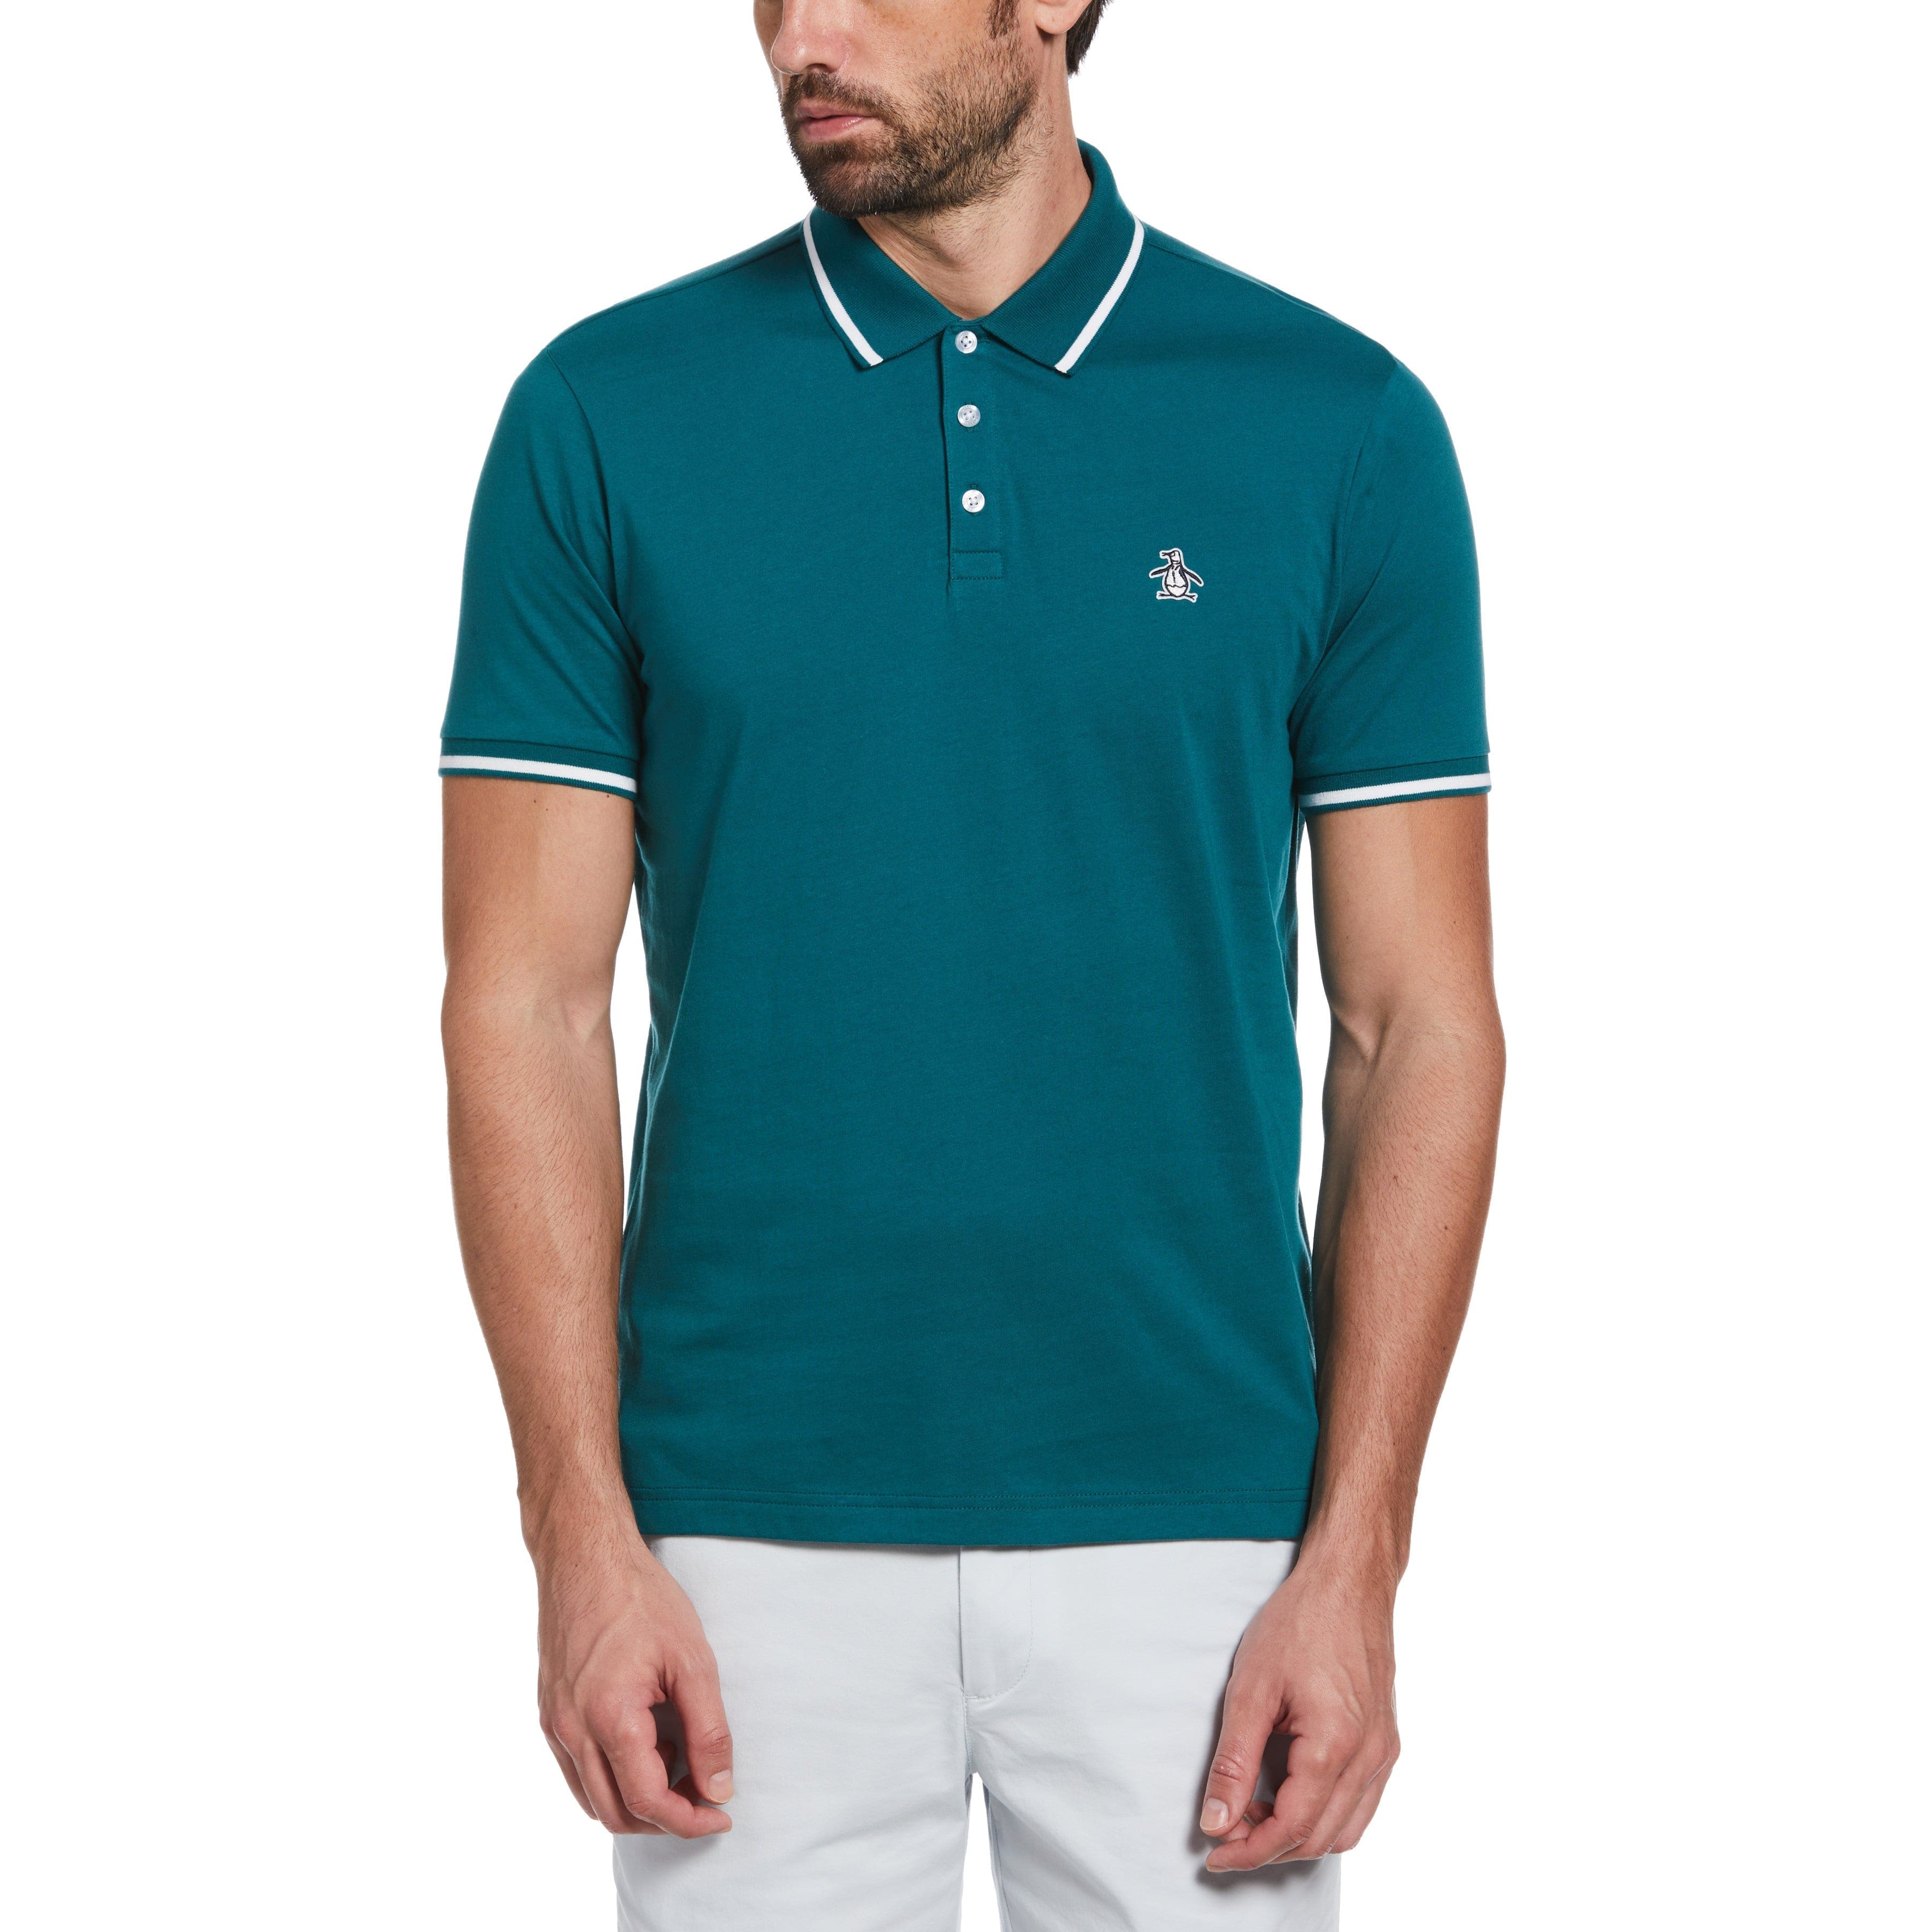 Original Penguin Heritage Fit Pocket Polo Shirt with Tonal Piping